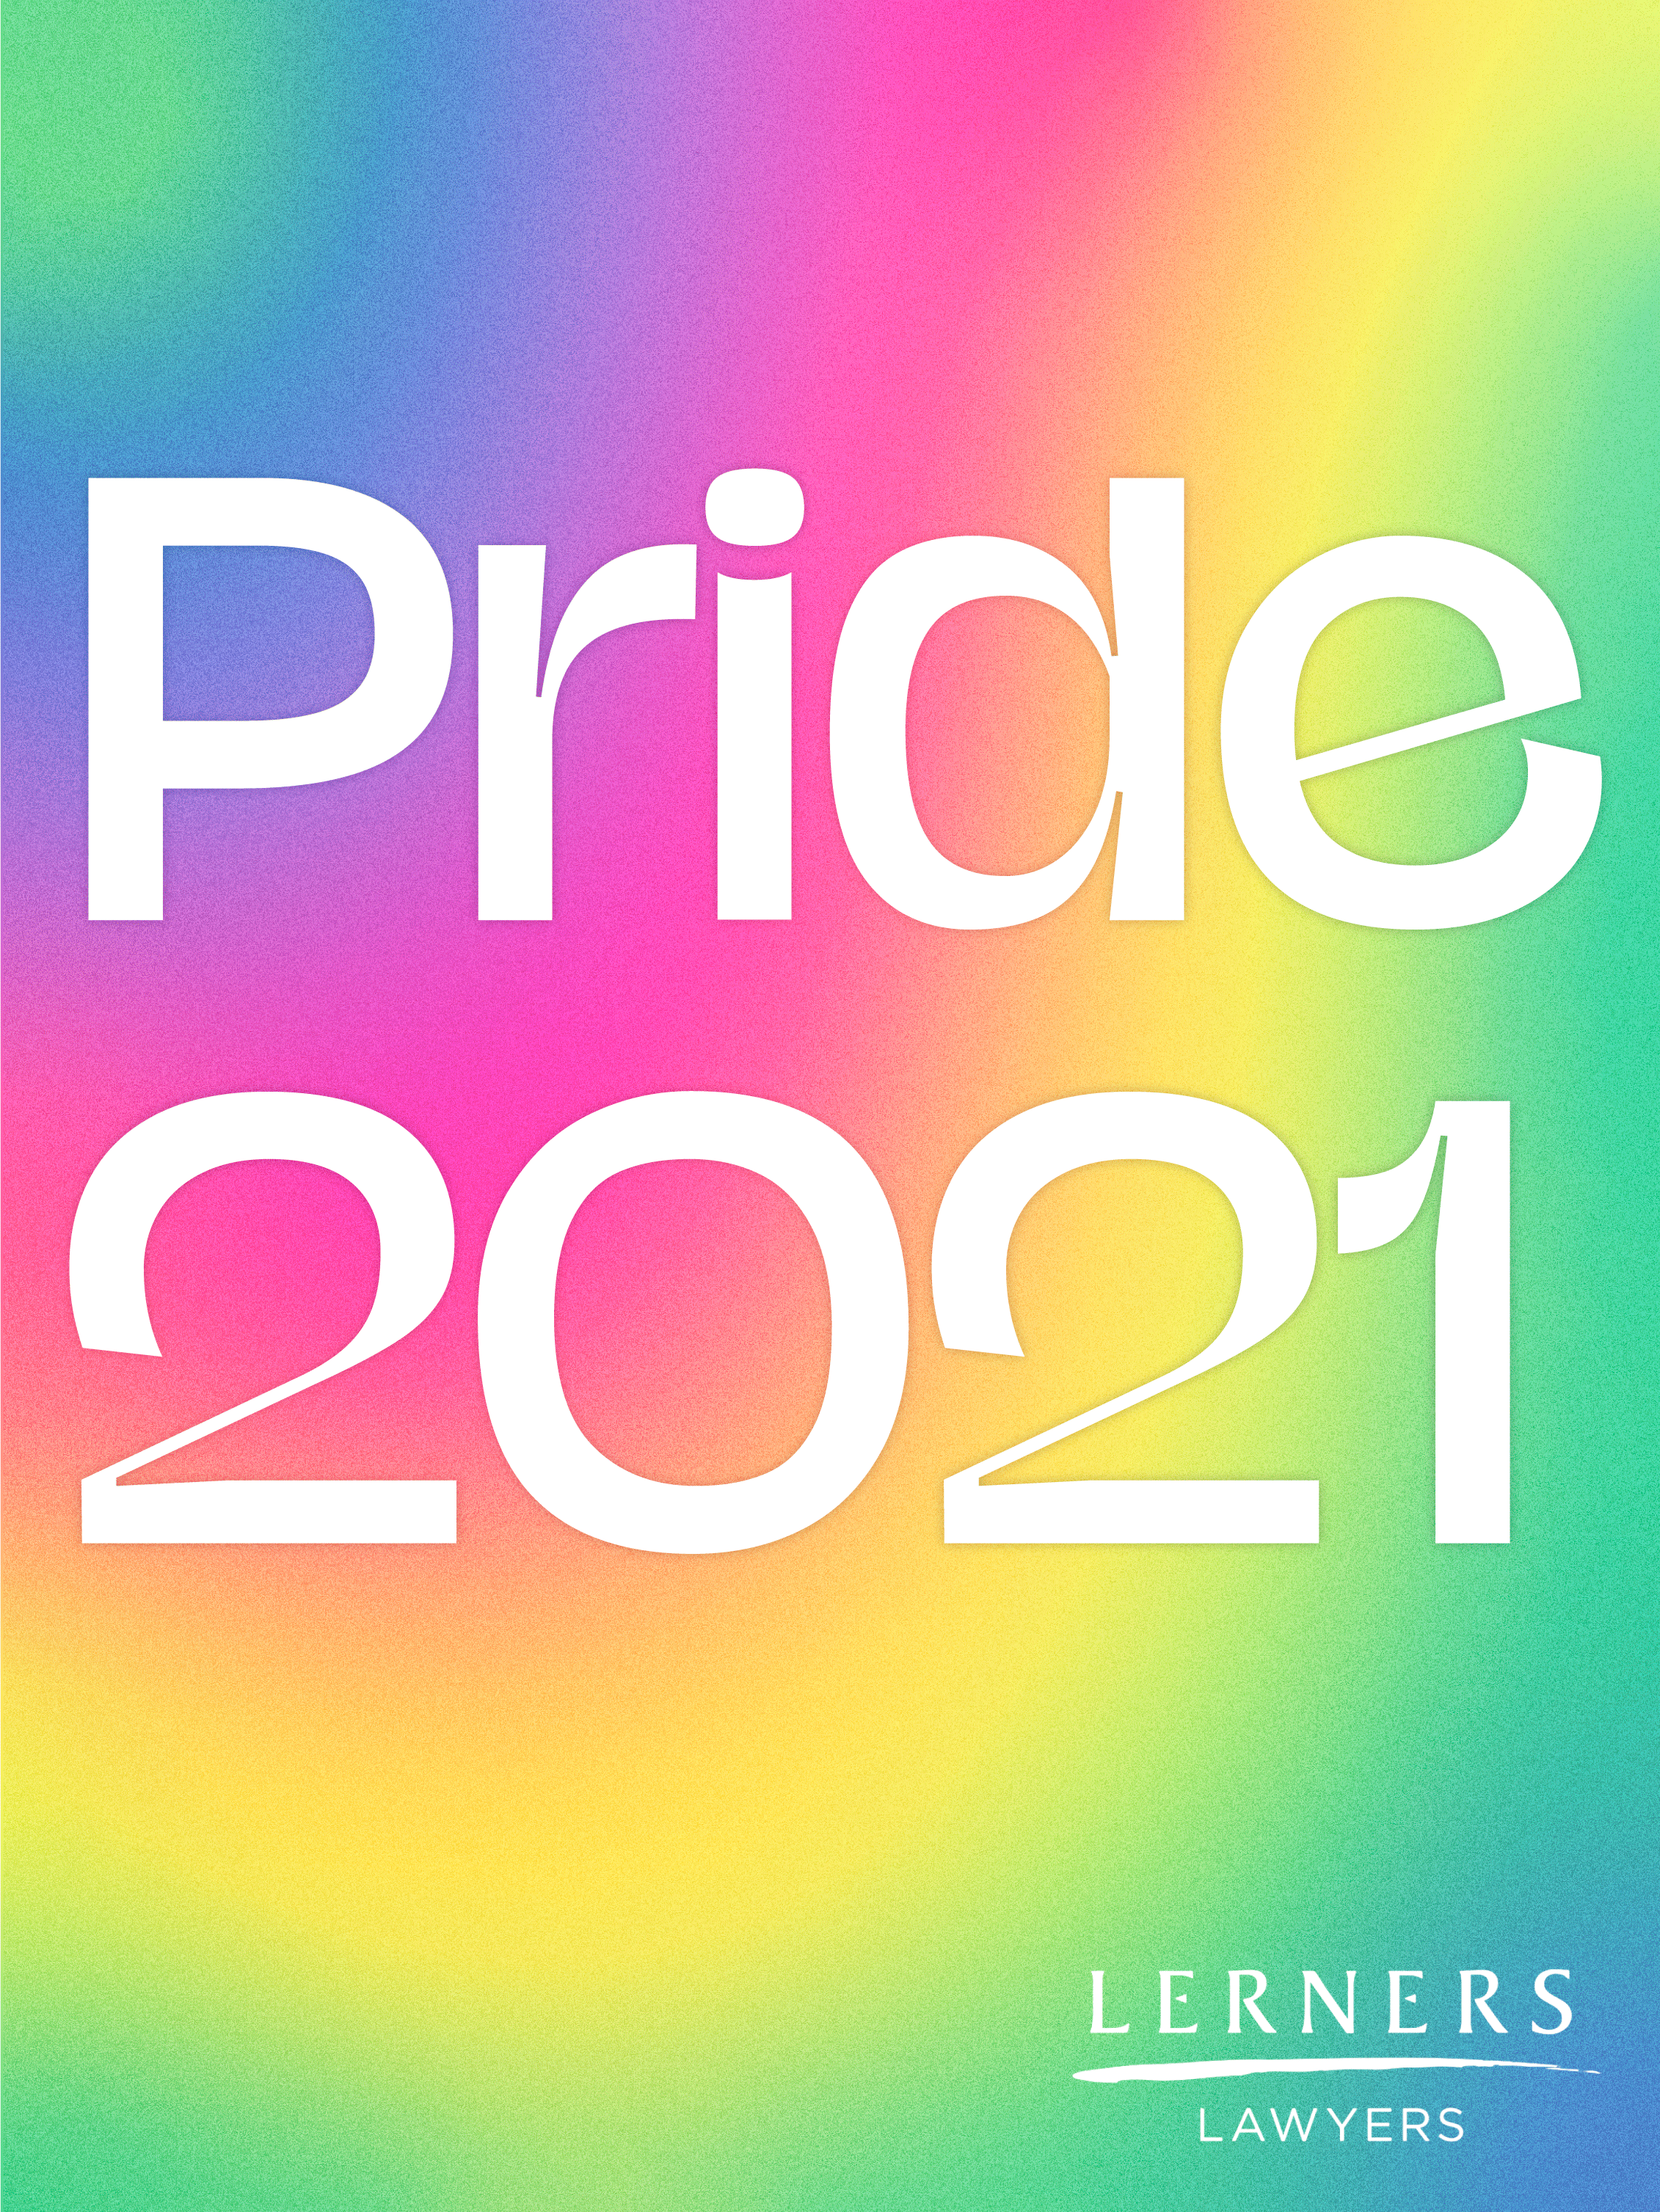 The Lerners Lawyers 2021 Pride celebrations marketing.